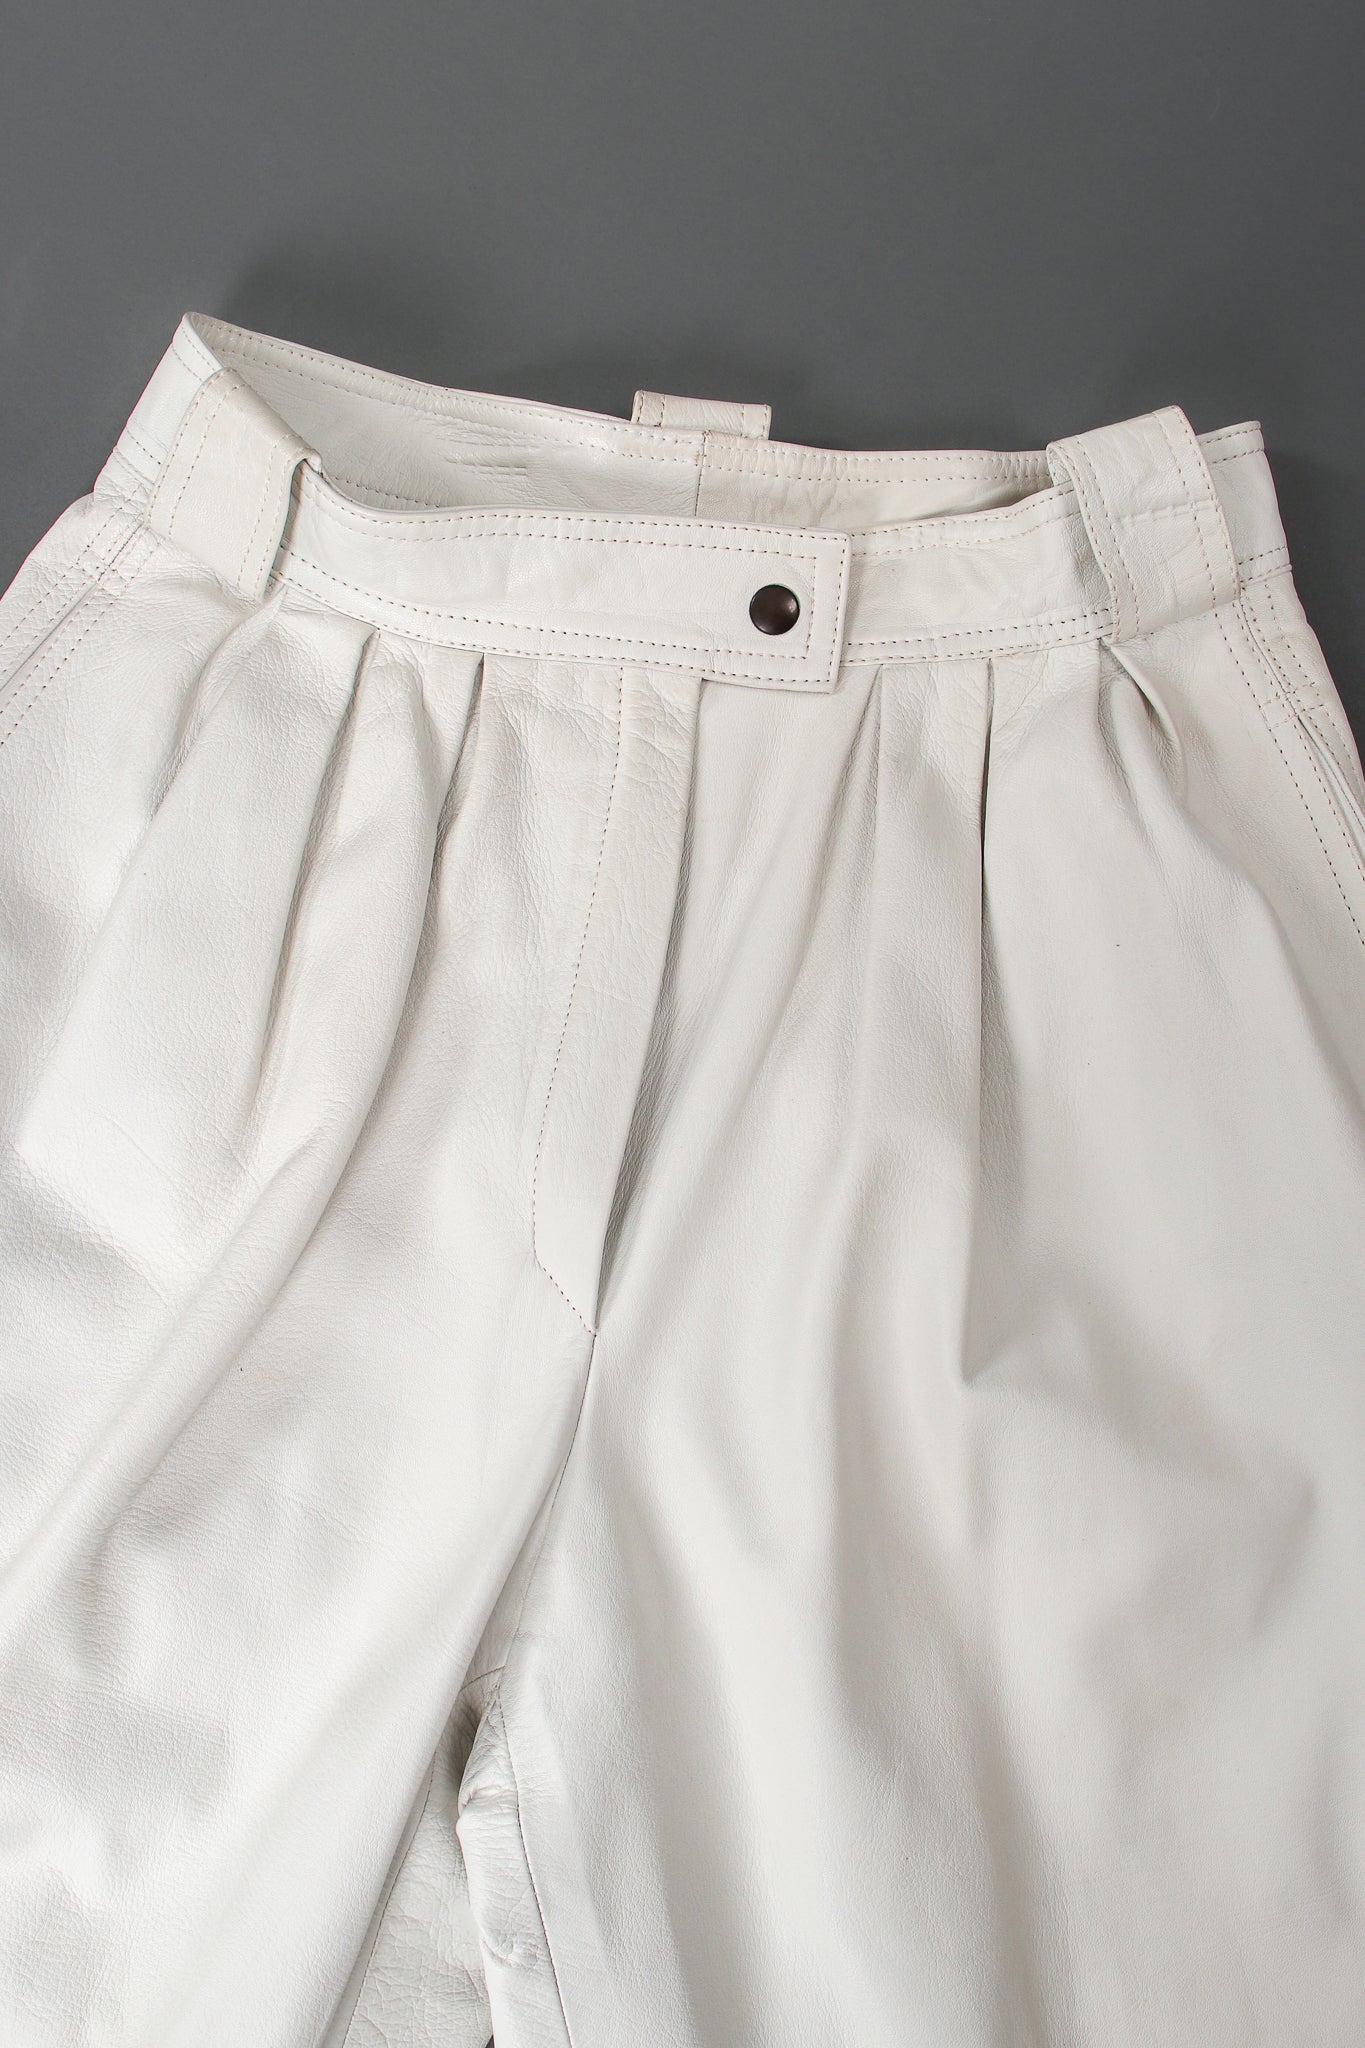 Vintage Loewe Belted Leather Pleat Pant front waist at Recess Los Angeles